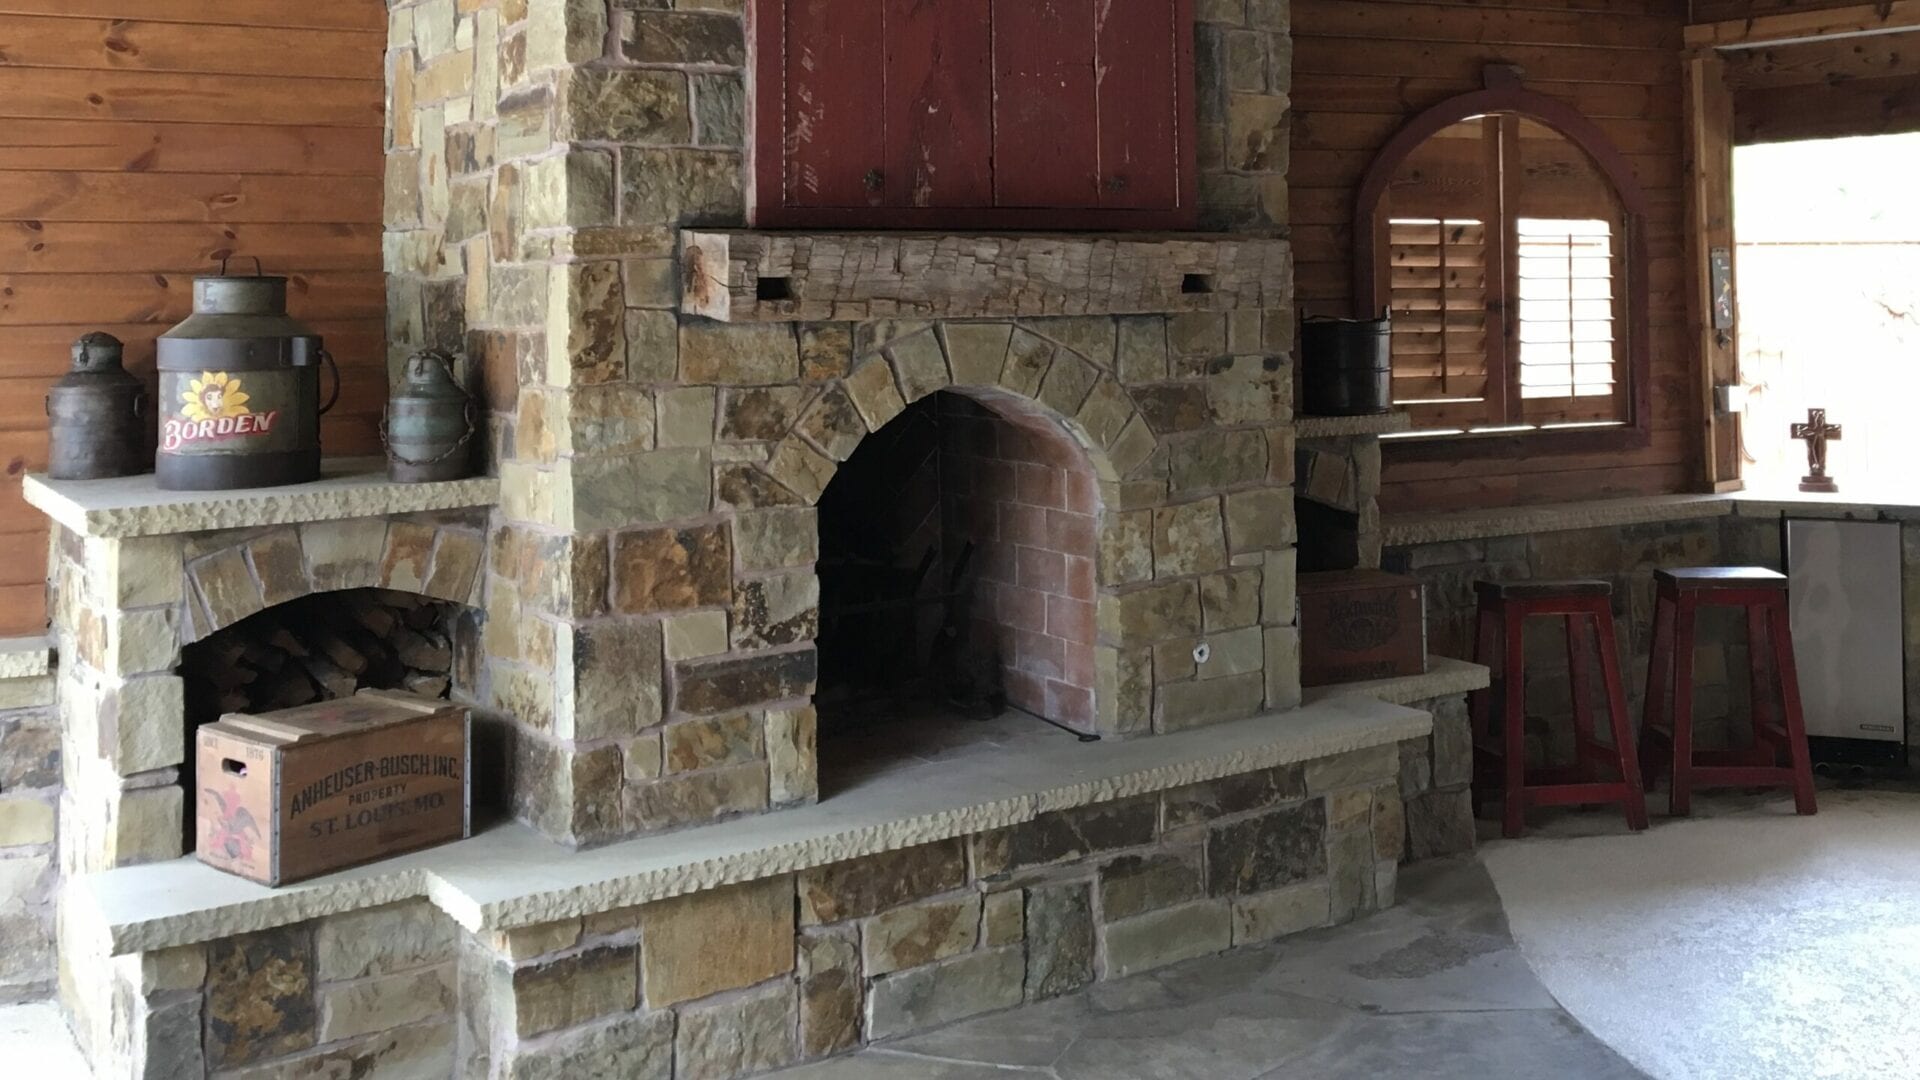 A stone fireplace with a red door in the middle.